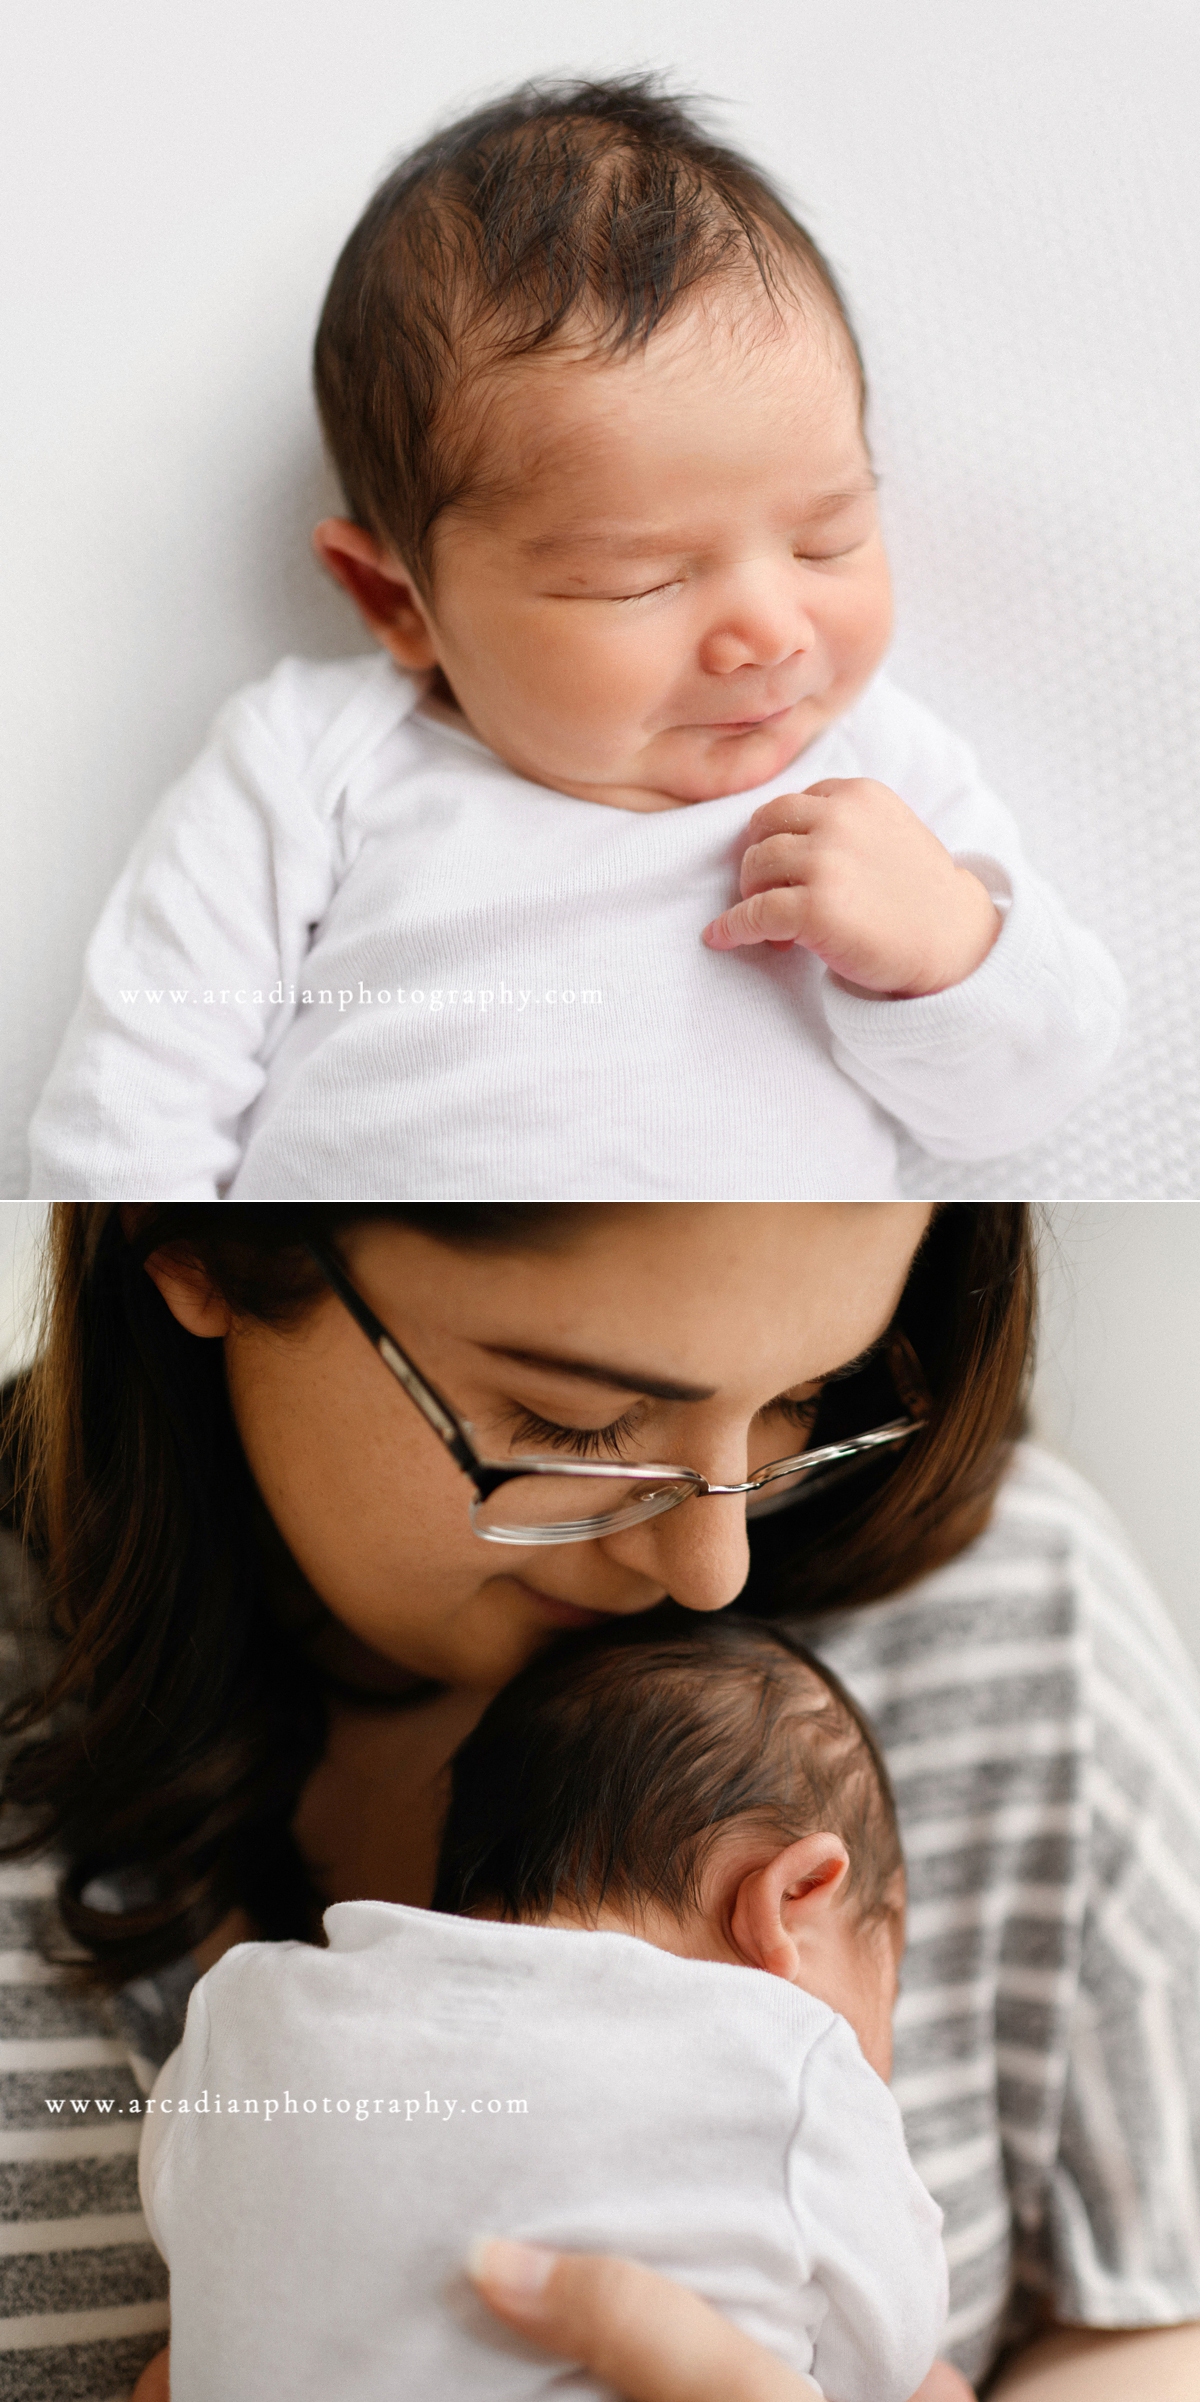 Newborn smiling and snuggled with mom. Learn more about booking newborn photos.